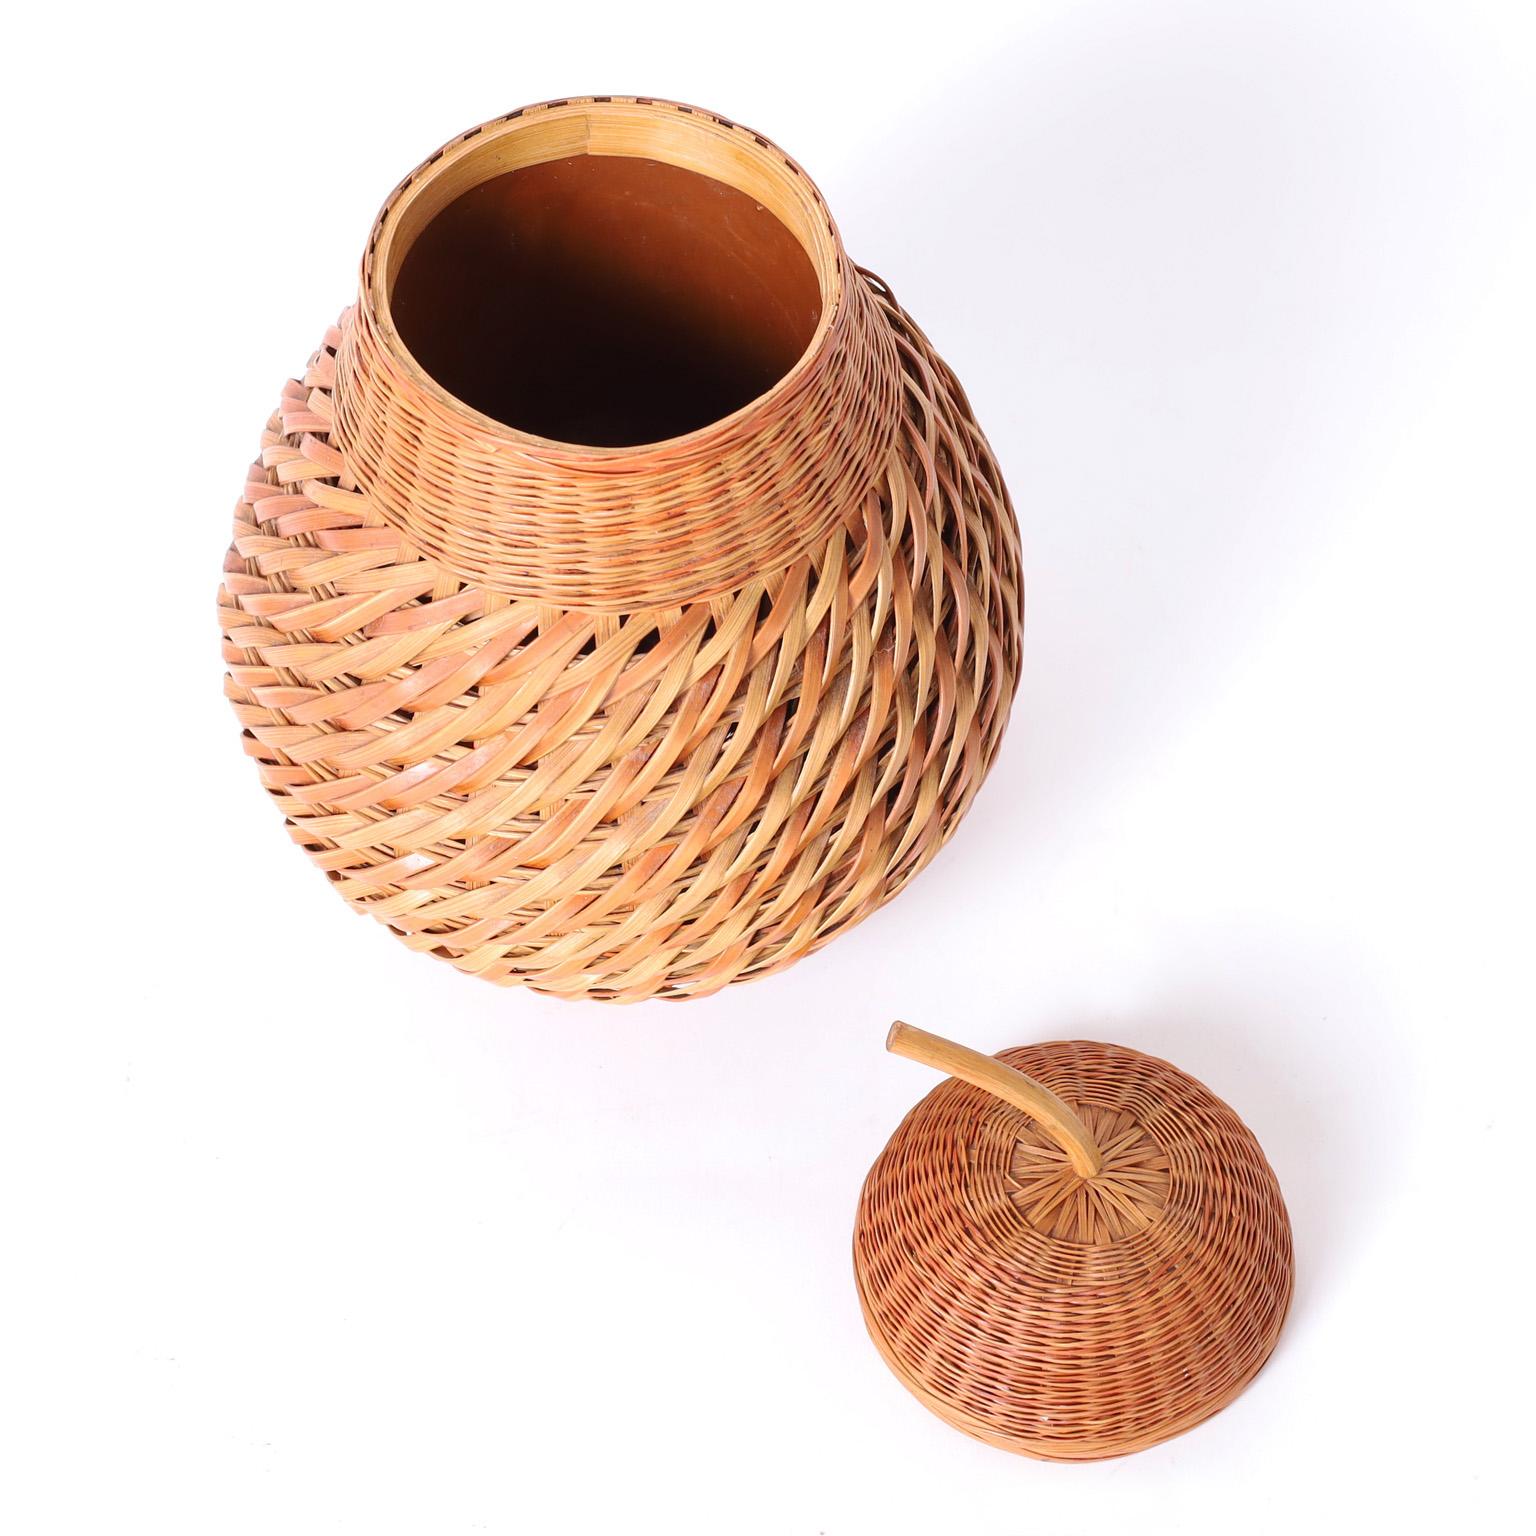 Woven Mid-Century Wicker Pear form Lidded Jar or Container